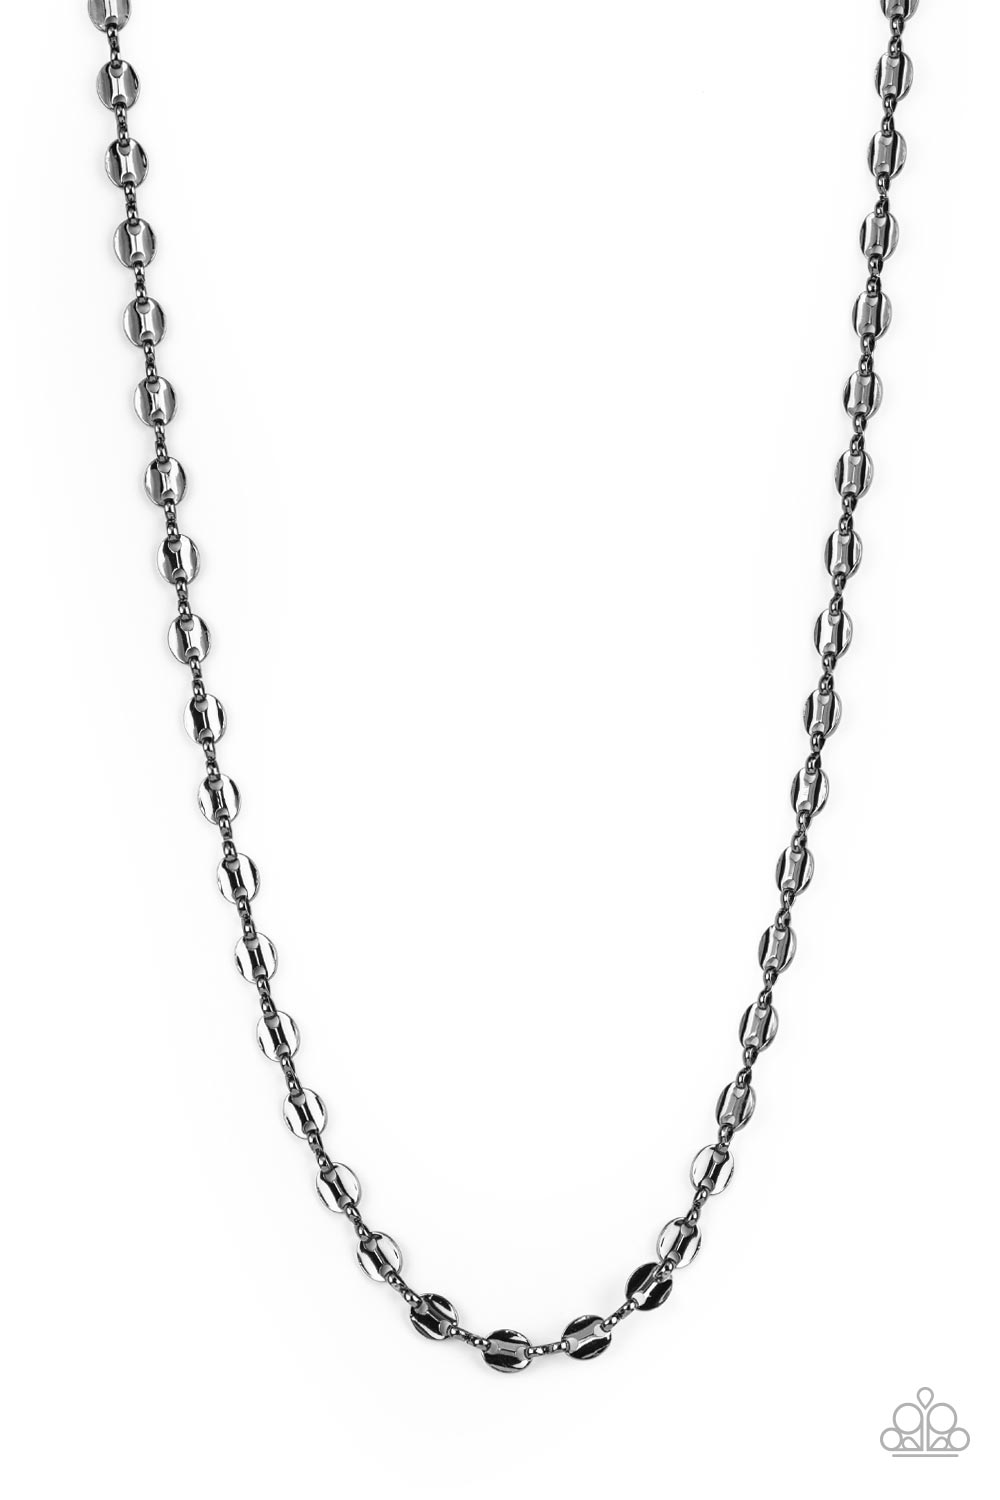 Come Out Swinging Paparazzi Accessories Necklace without Earrings